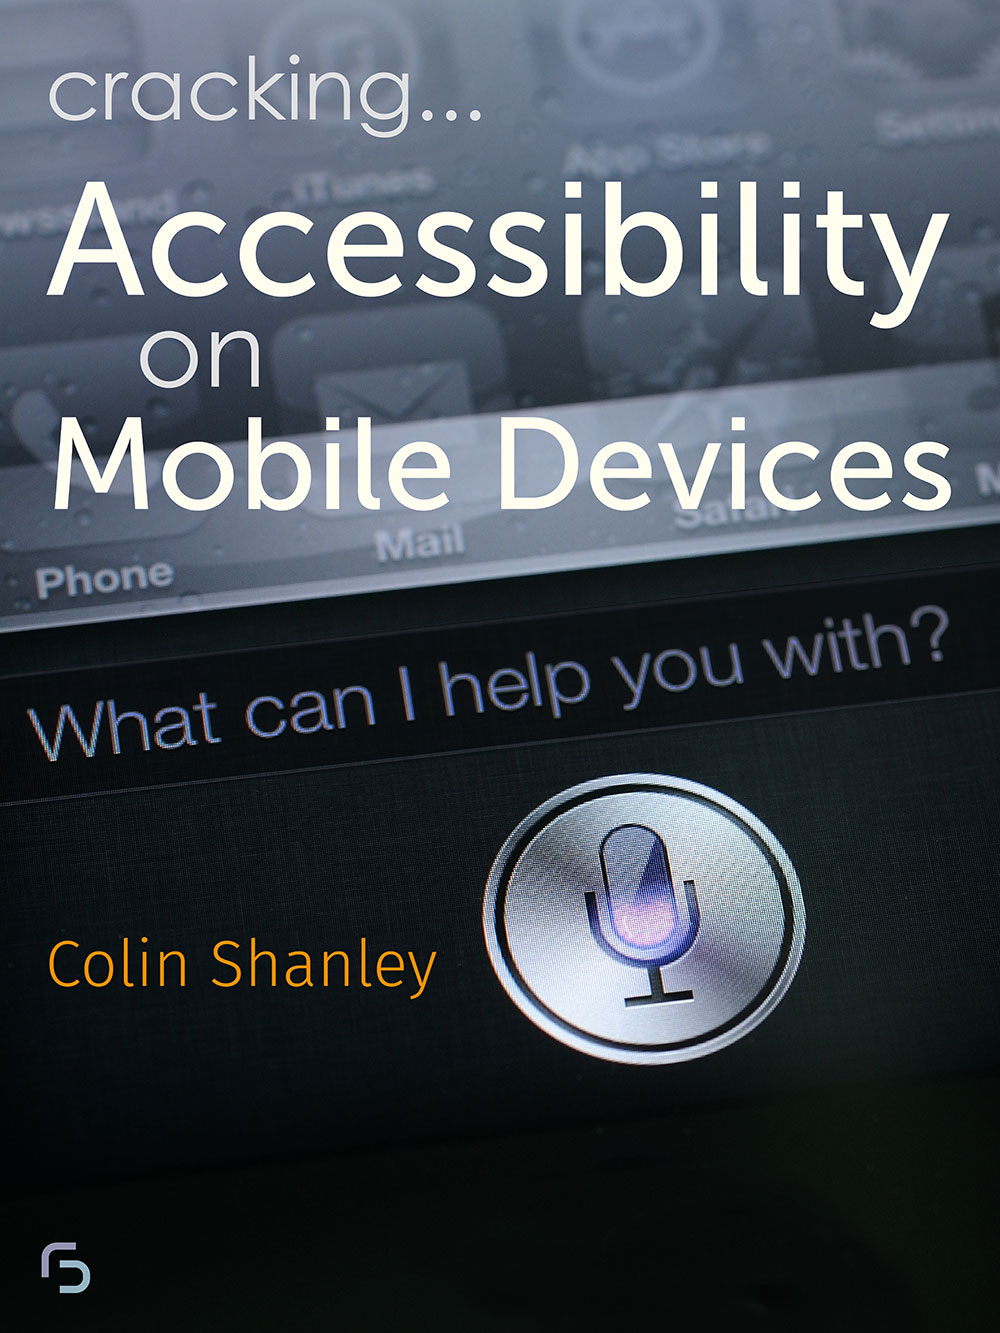 Book cover - Cracking Accessibility on Mobile Devices